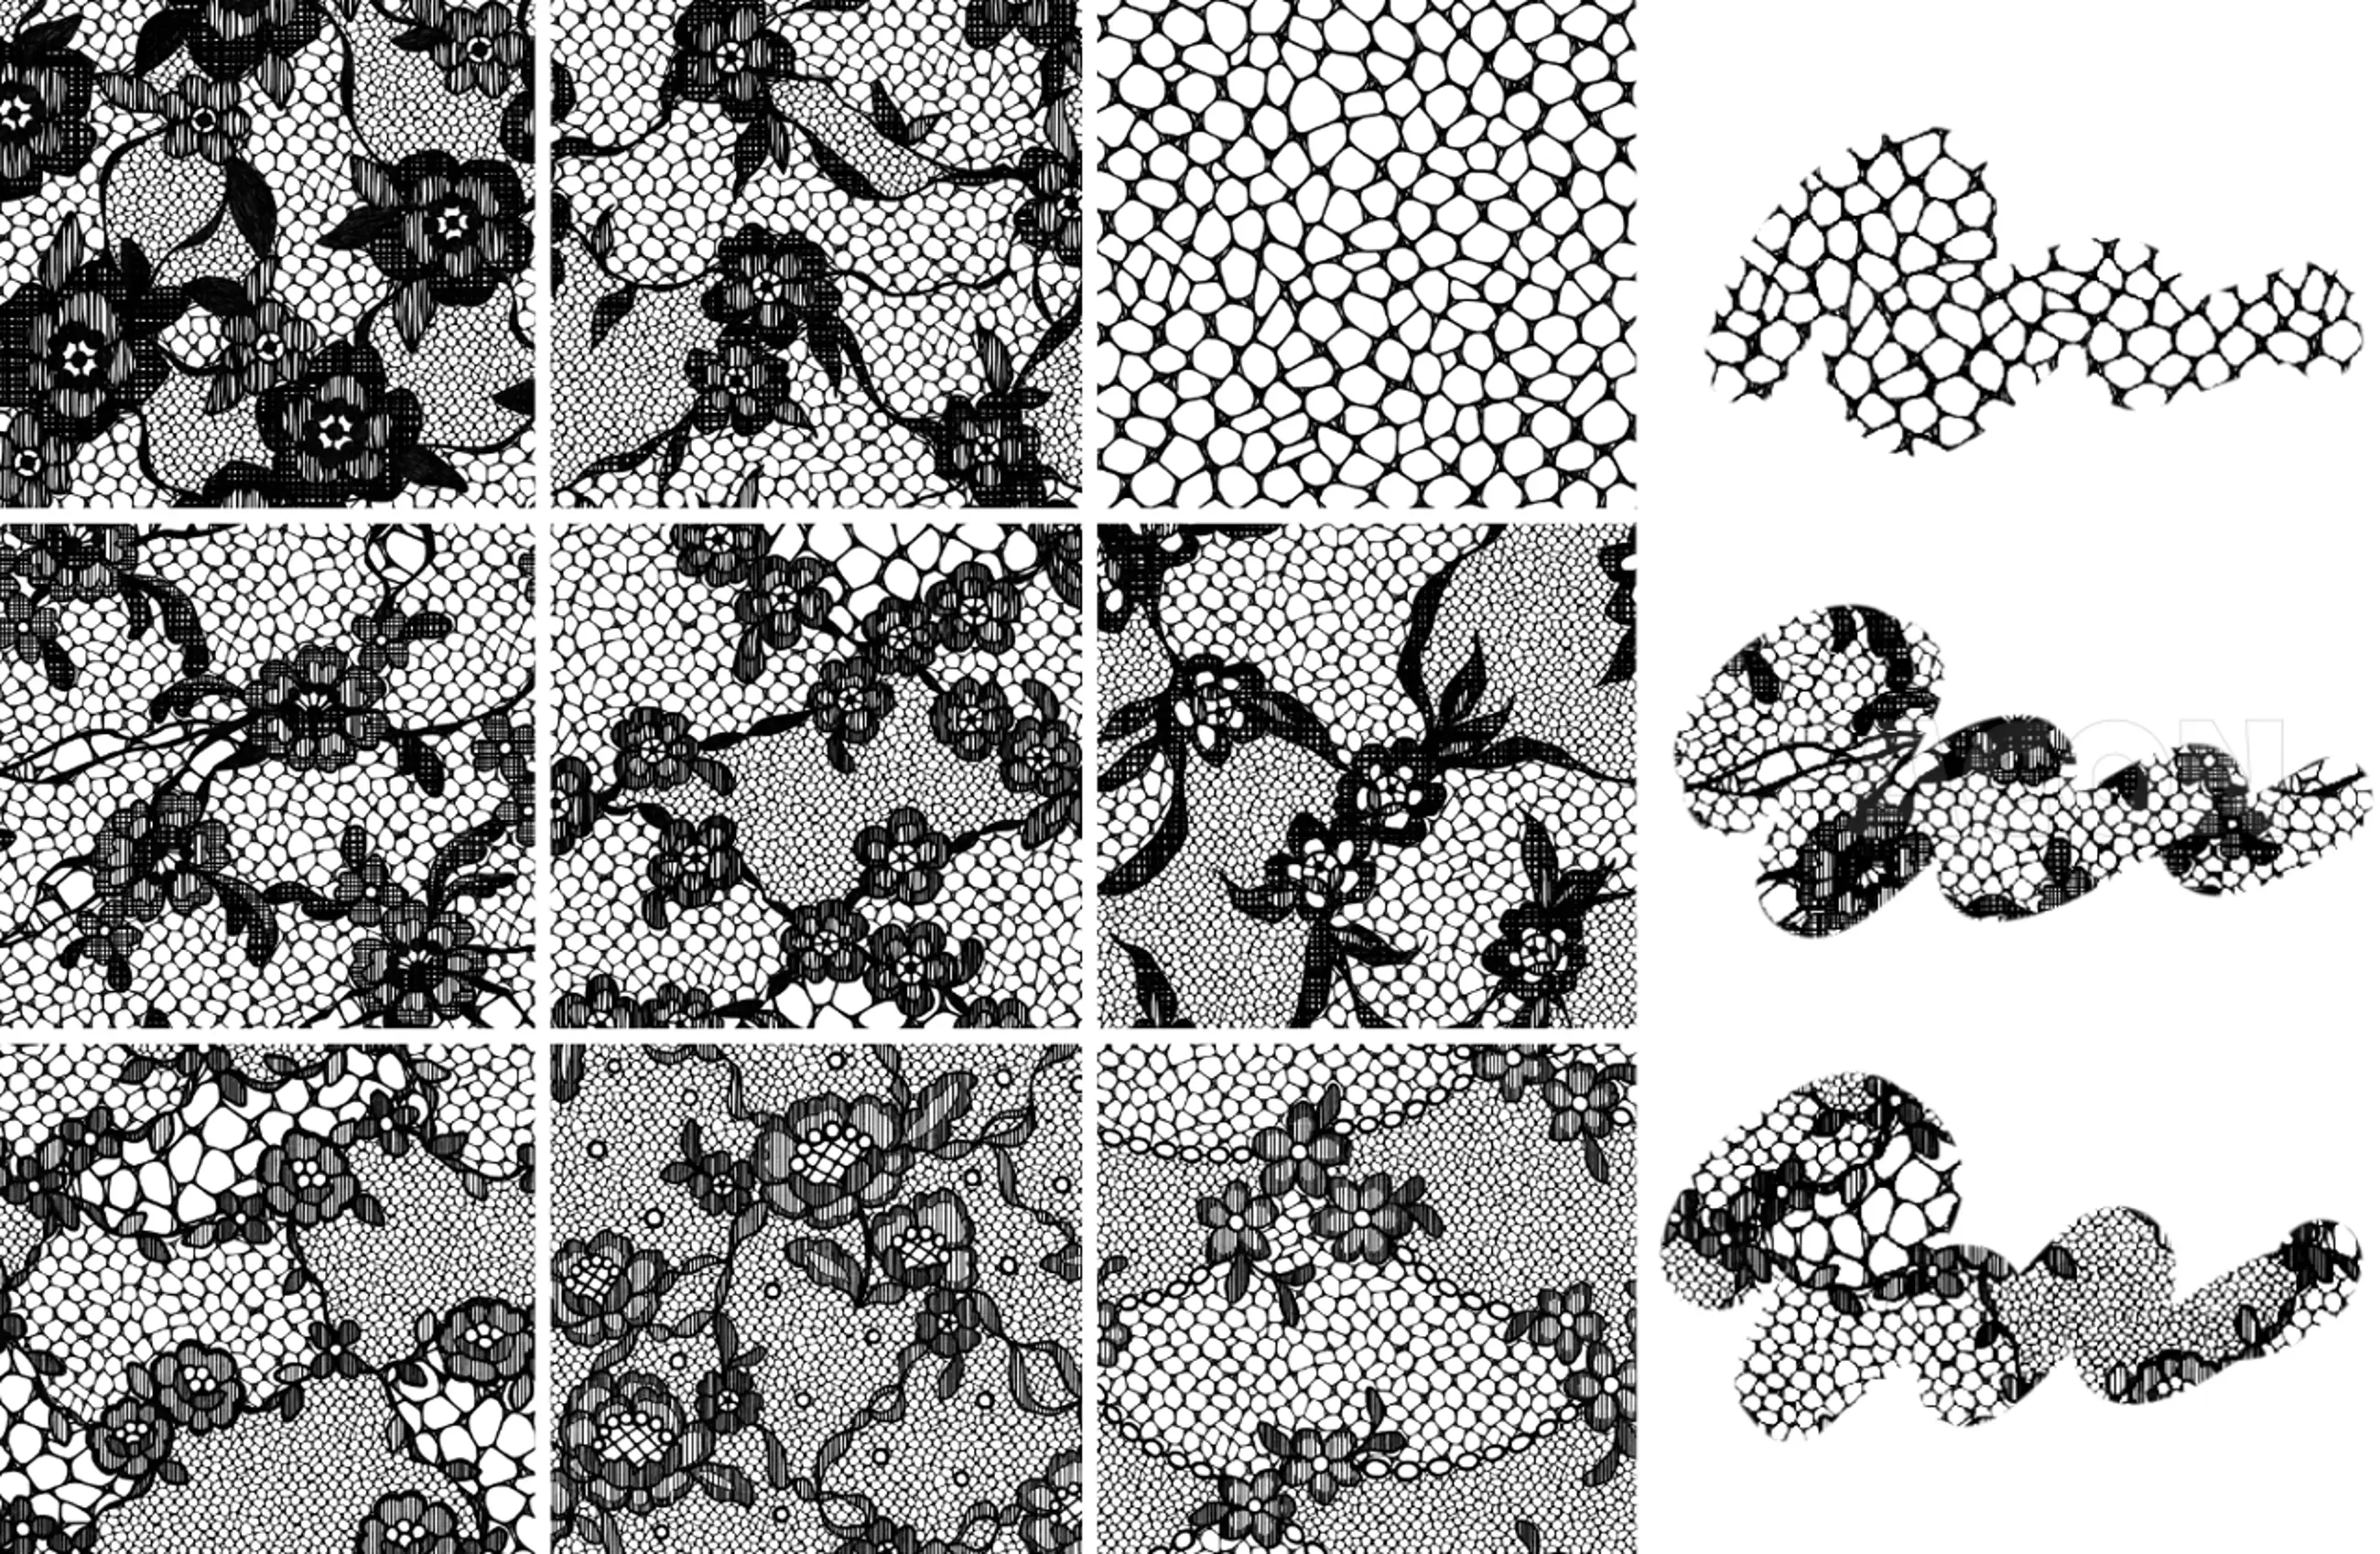 737,277 Seamless Lace Pattern Images, Stock Photos, 3D objects